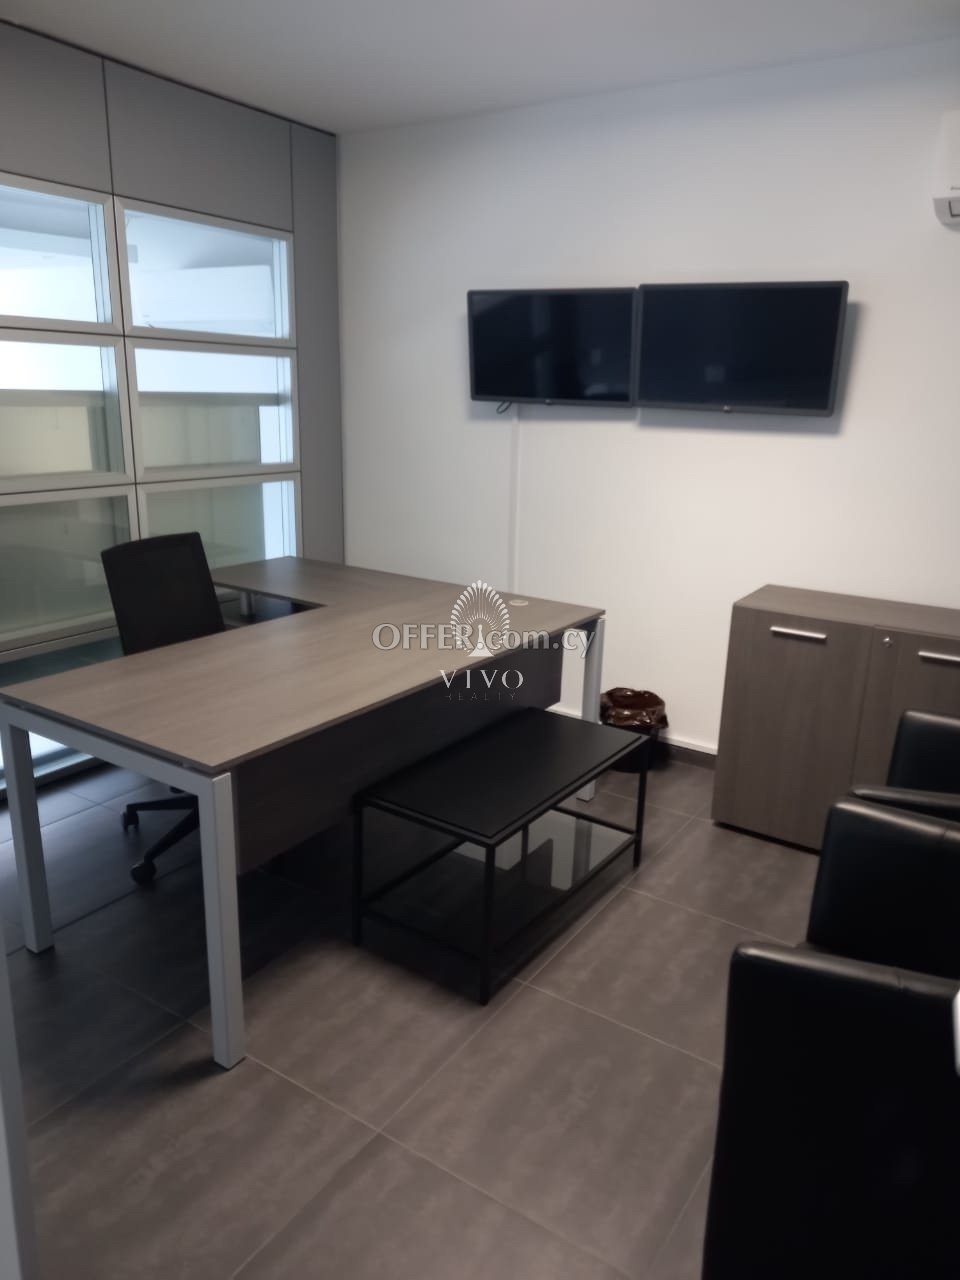 SEA FRONT OFFICE SPACE FOR RENT - 8